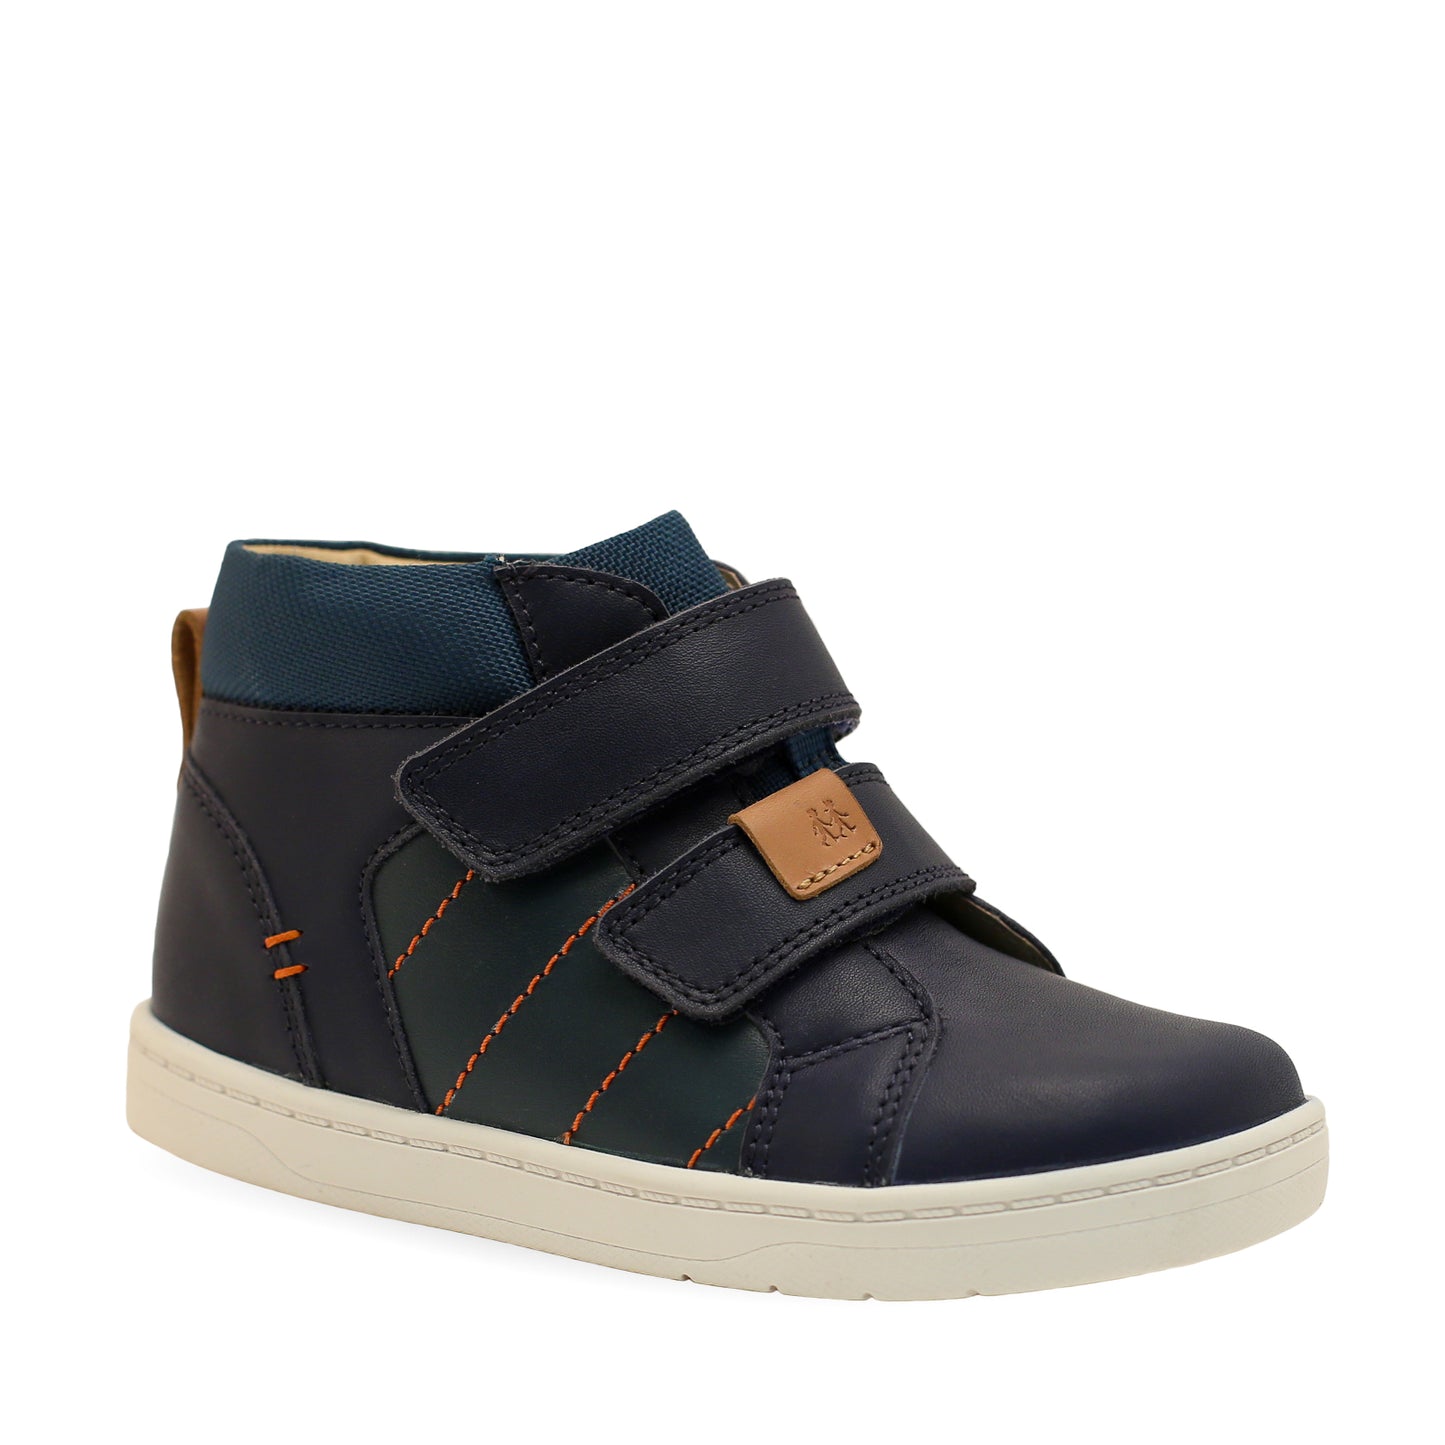 Discover Navy and Dark Green Leather Boot